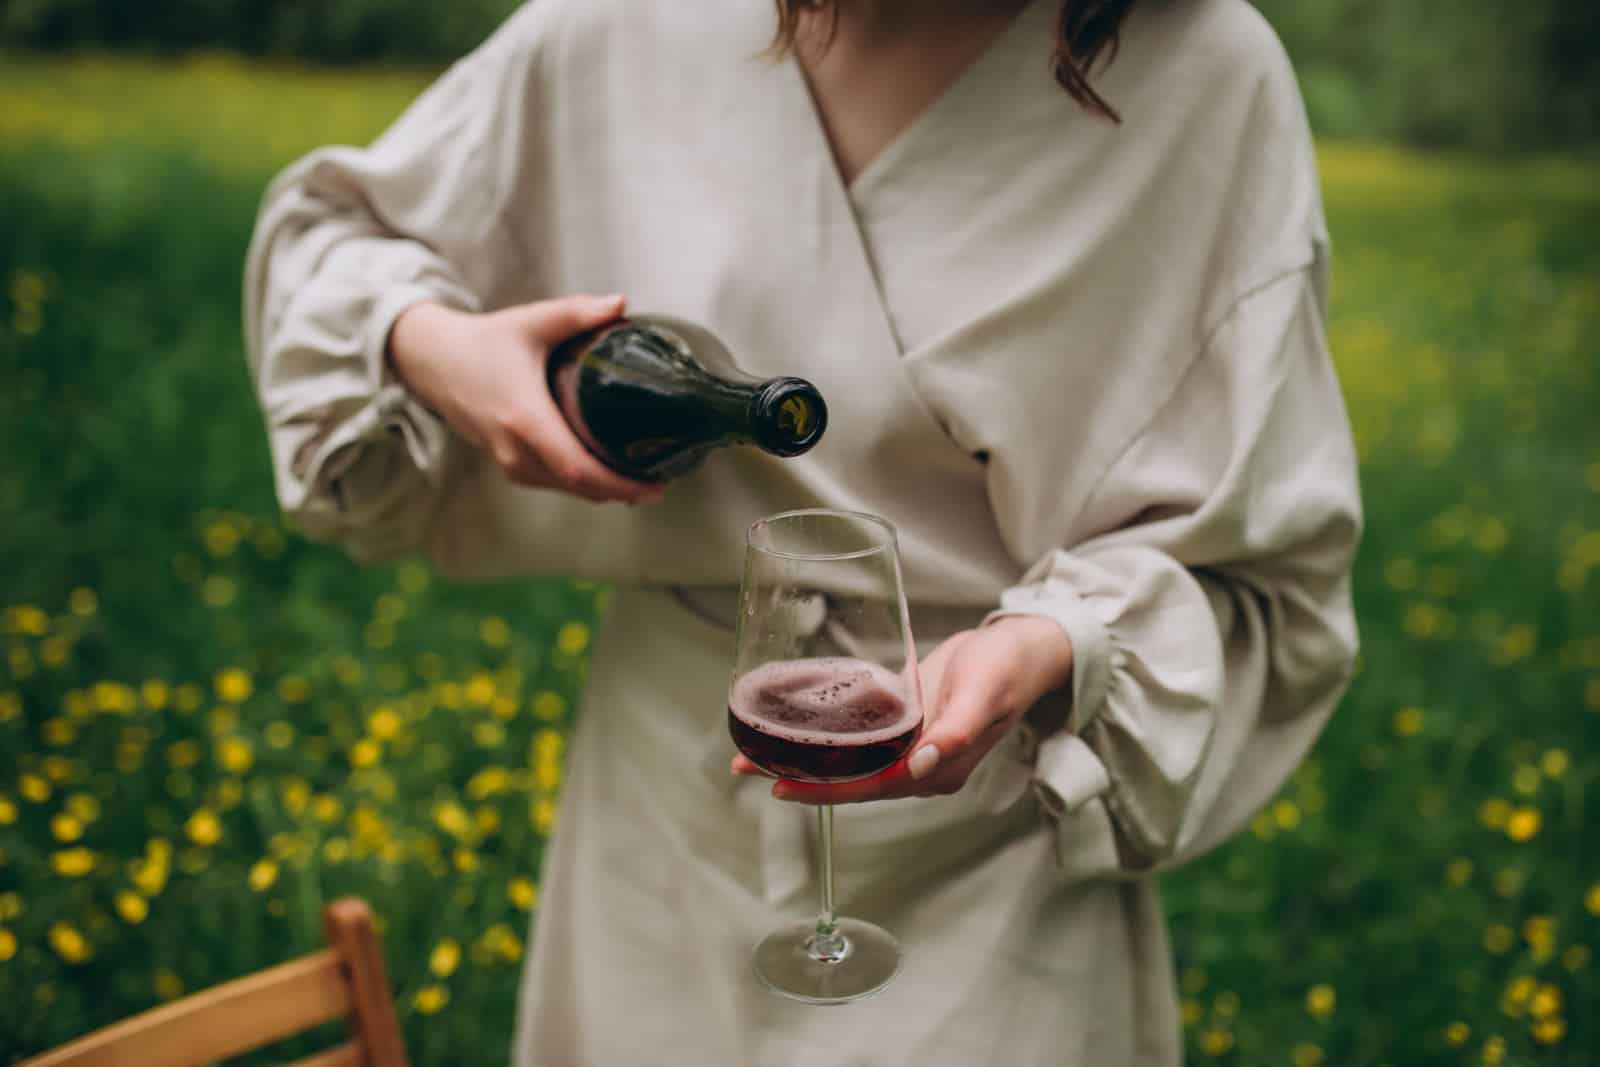 Pouring red wine into a glass in the garden.